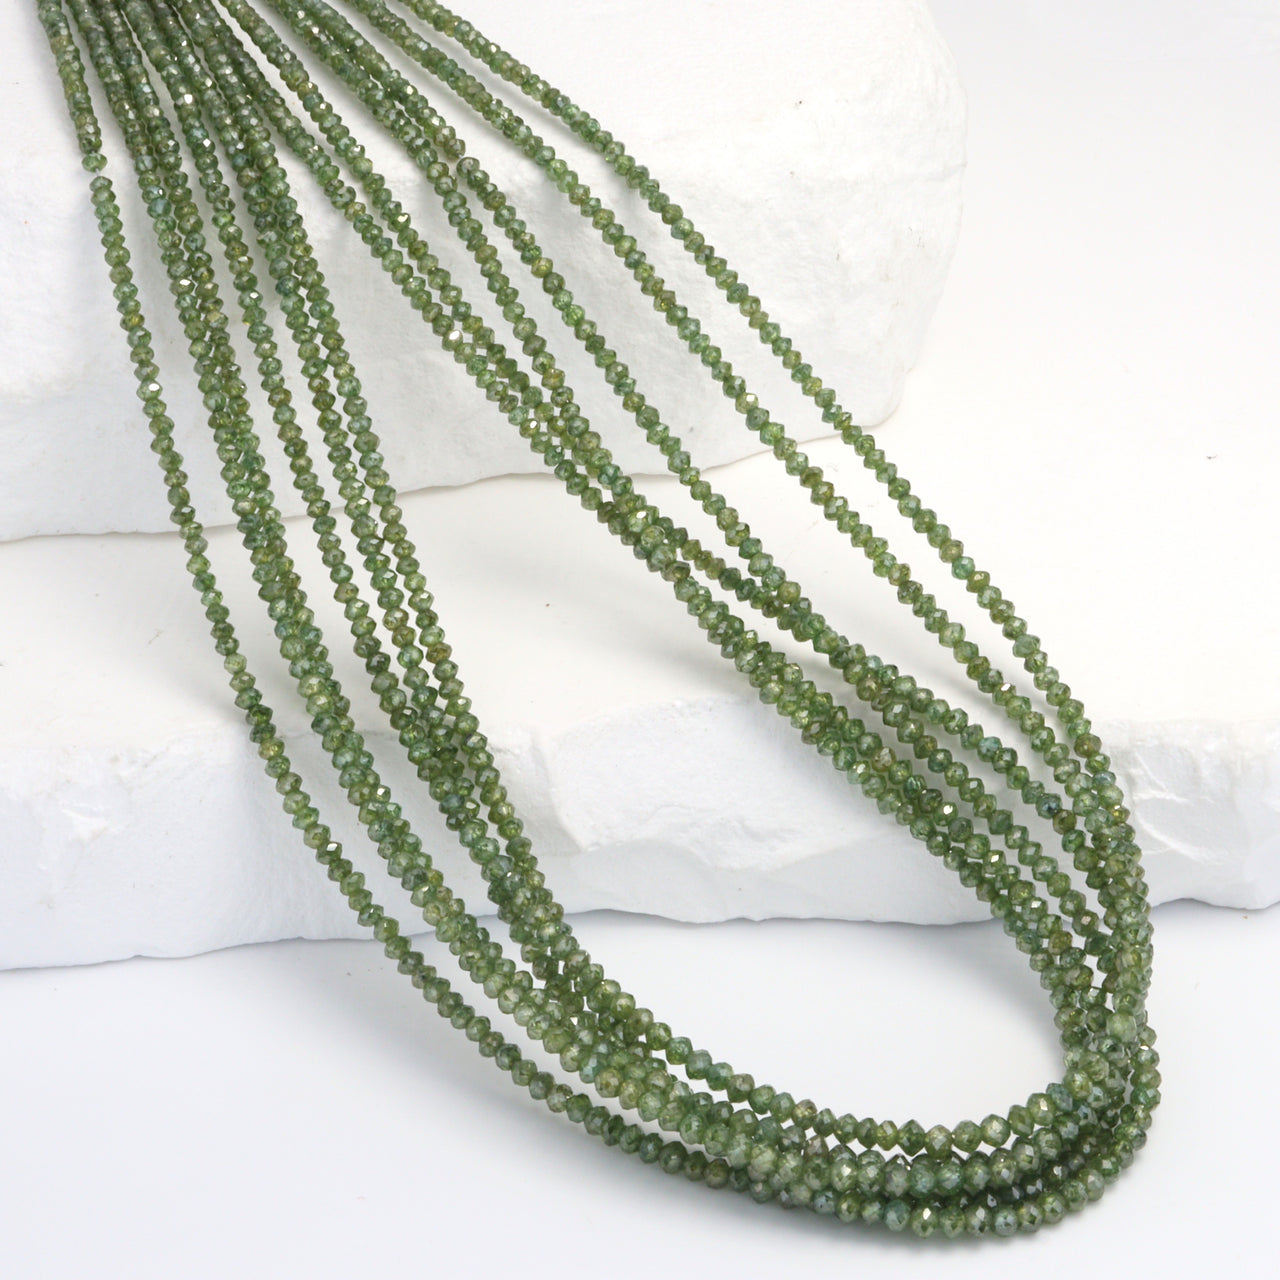 Green Diamond 1.4mm Faceted Rondelles